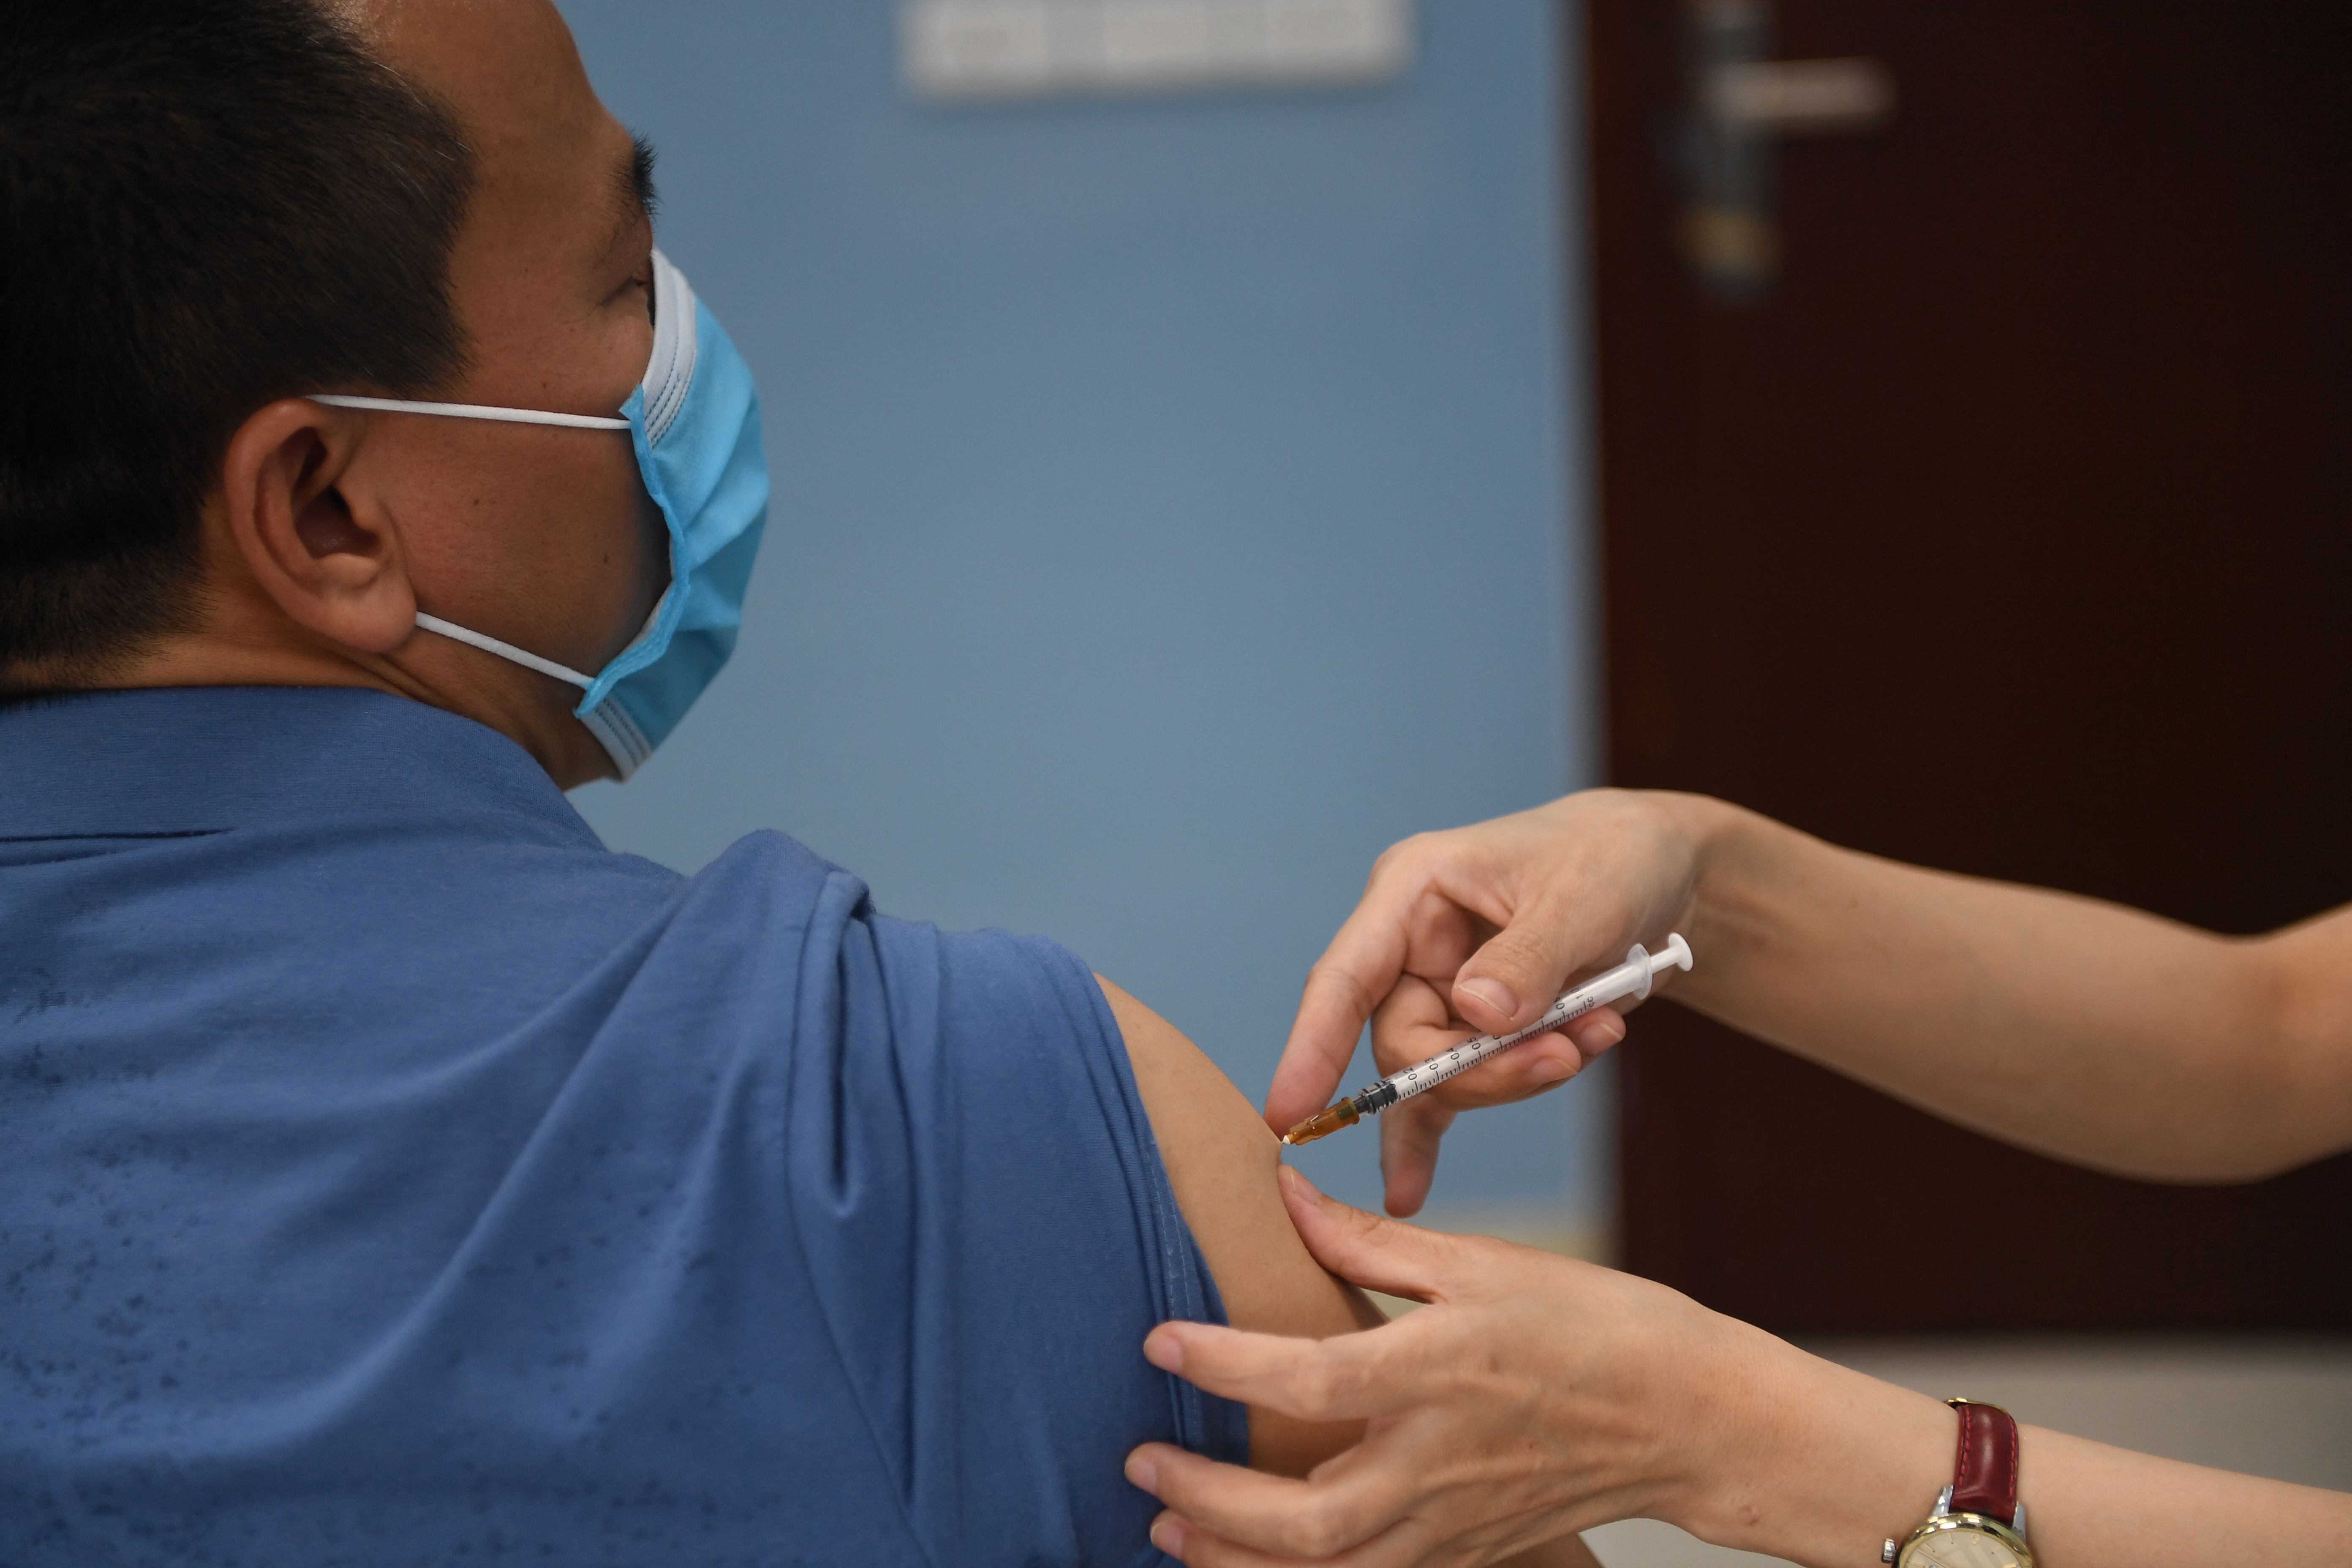 A health worker administers a dose of the AstraZeneca Covid-19 vaccine at a hospital in Hanoi this week. Photo: AFP